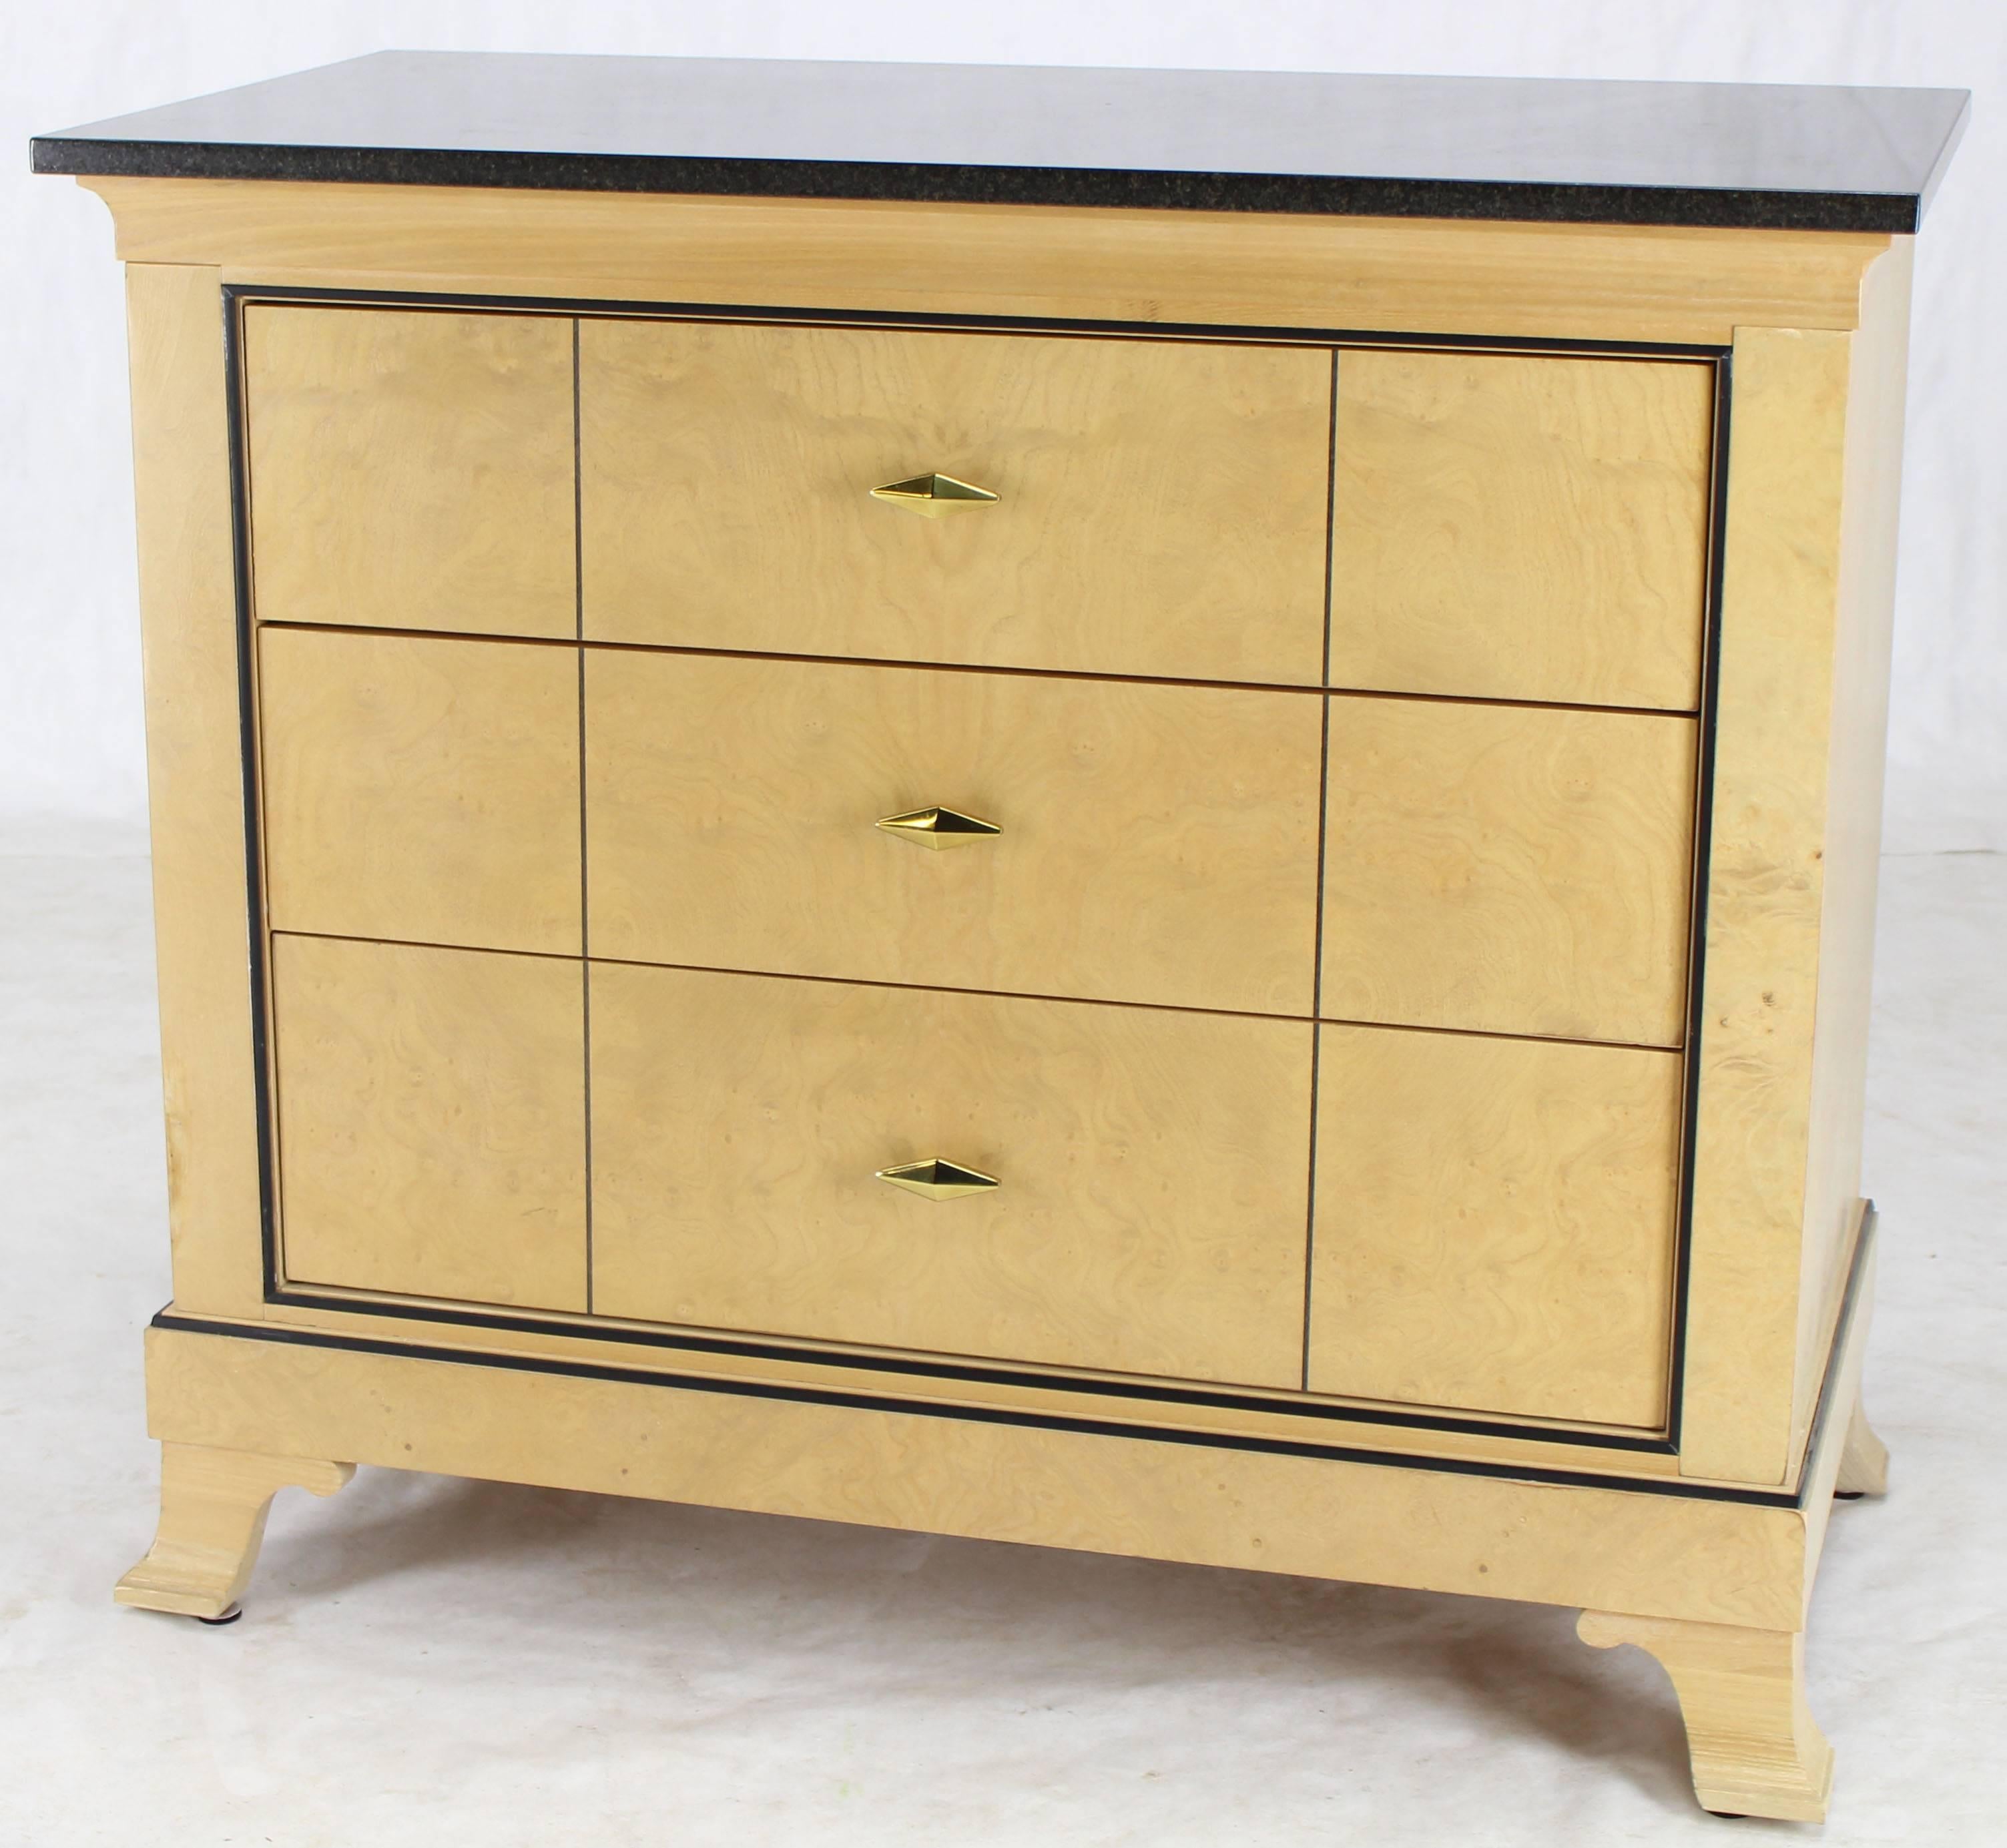 White wash burl wood finish dresser with granite not marble top. Beautiful Mid-Century Modern style design.